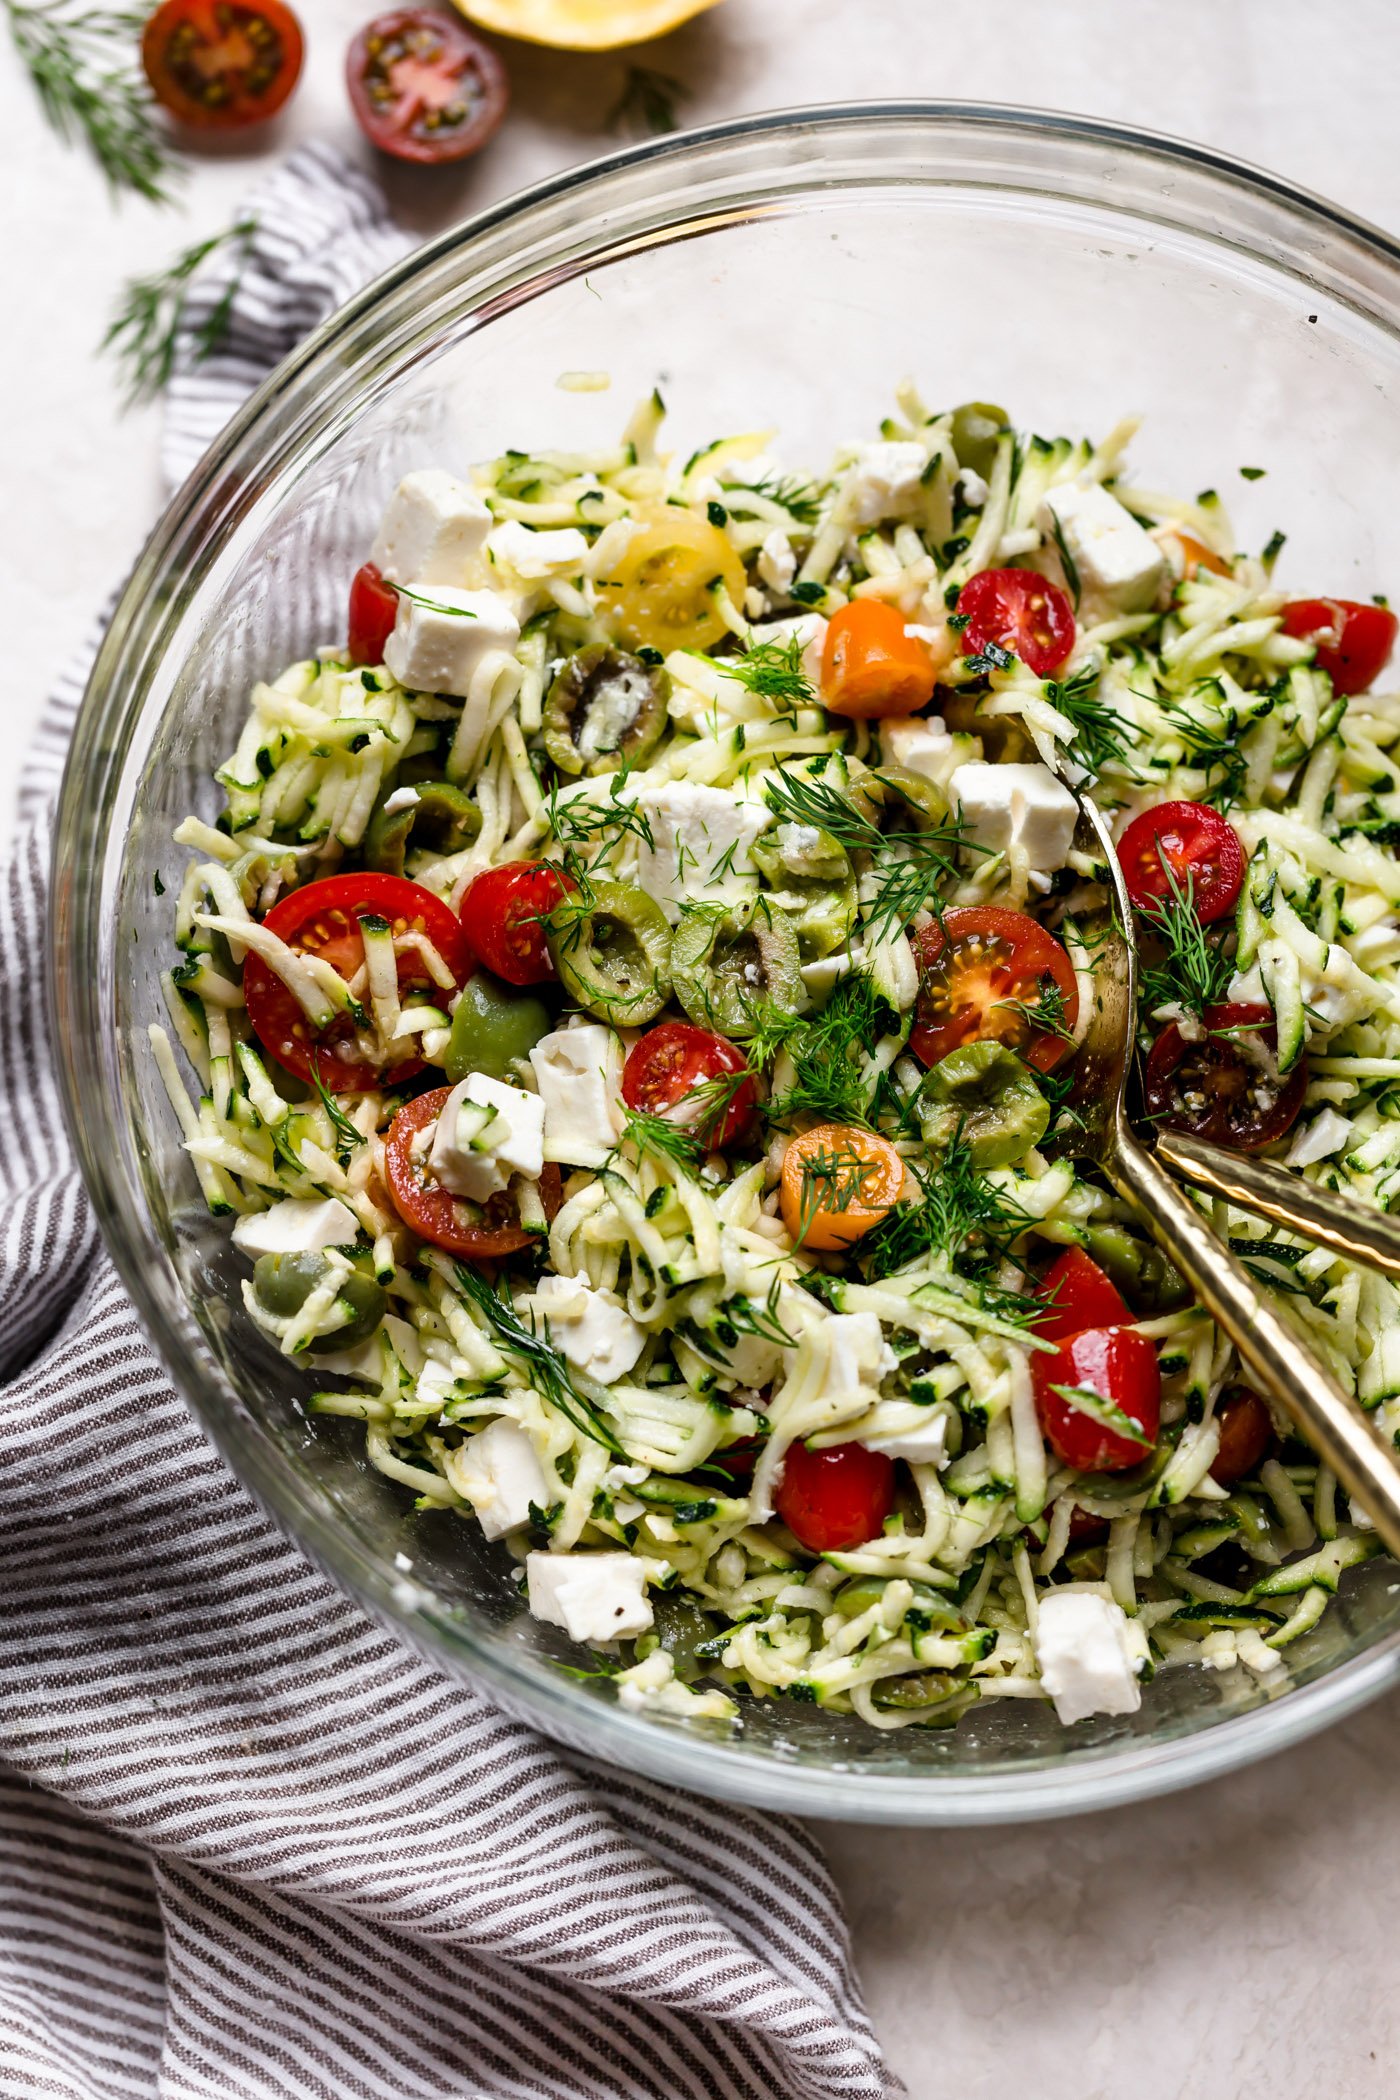 lemony grated zucchini salad with tomatoes, olives &amp; feta (7 ingredients!)